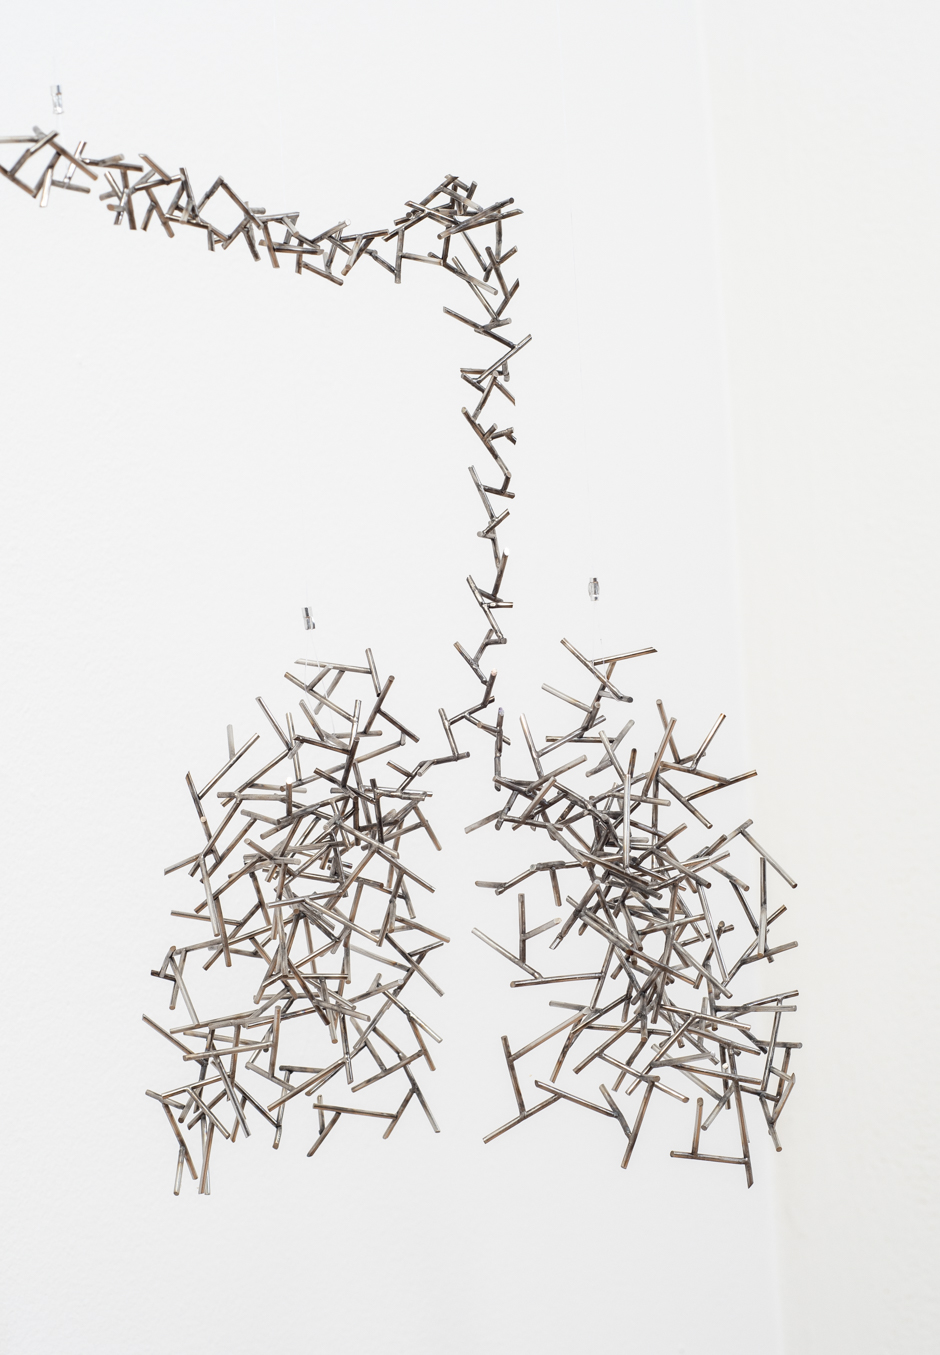 Detail image of "Exchange III" sculpture created from welded stainless steel